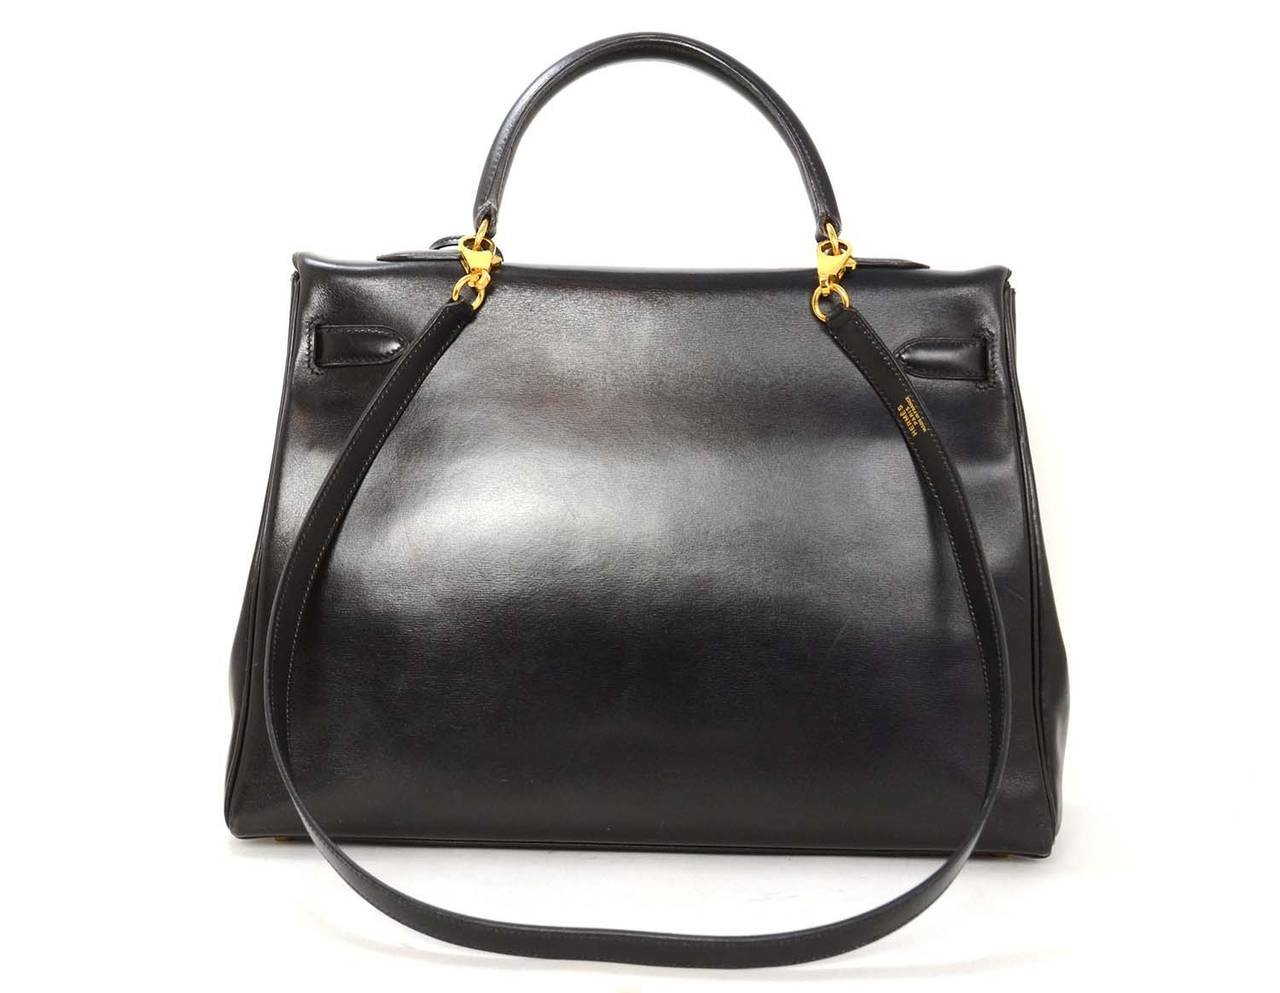 This iconic bag is finely crafted of box leather in classic black and features a sturdy reinforced leather top handle, a frontal flap, optional shoulder strap and goldtone hardware. This chic handbag is a beautiful compliment to any day or evening